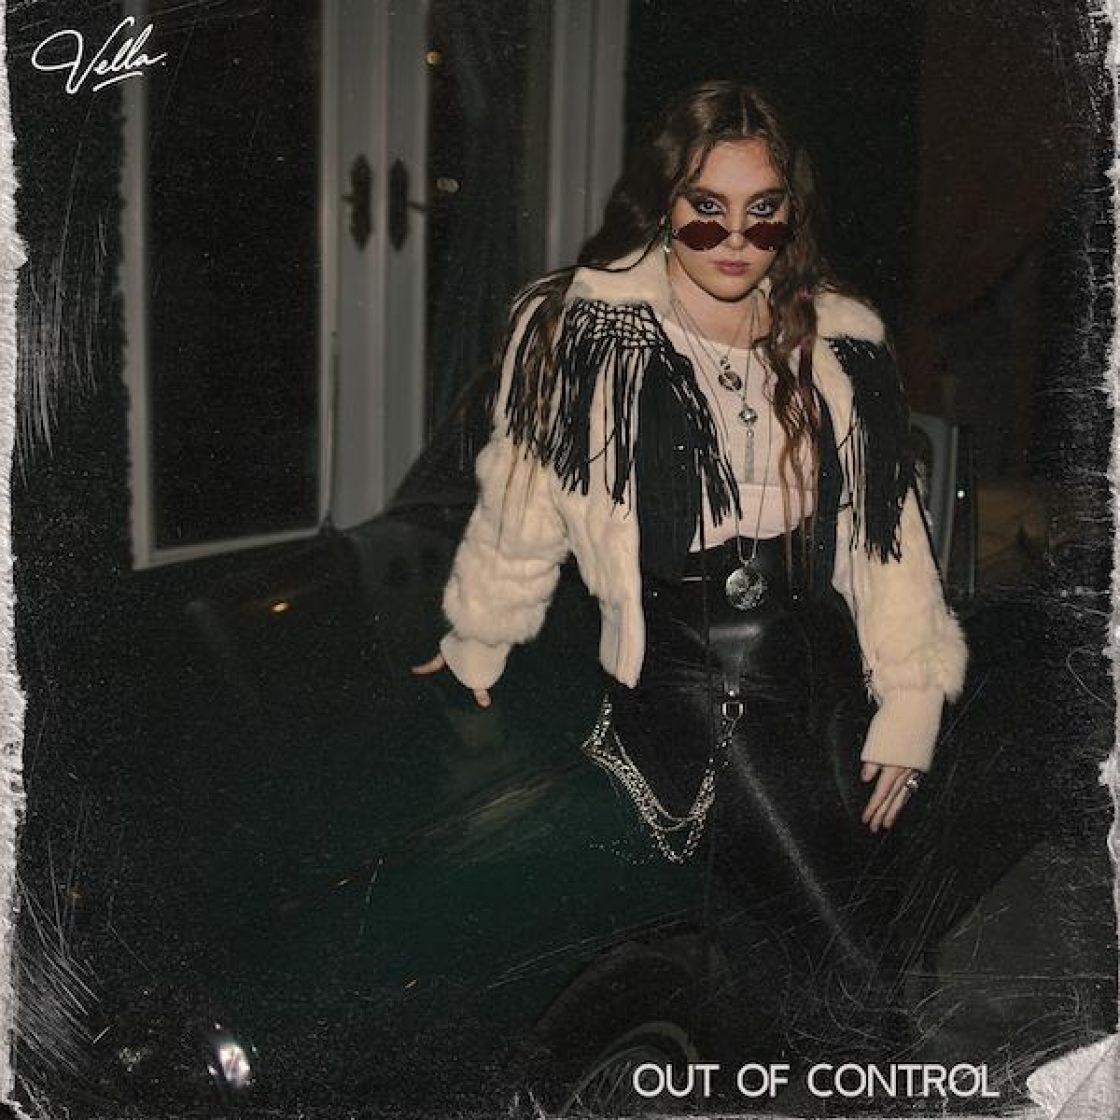 New Music by Vella - Out Of Control